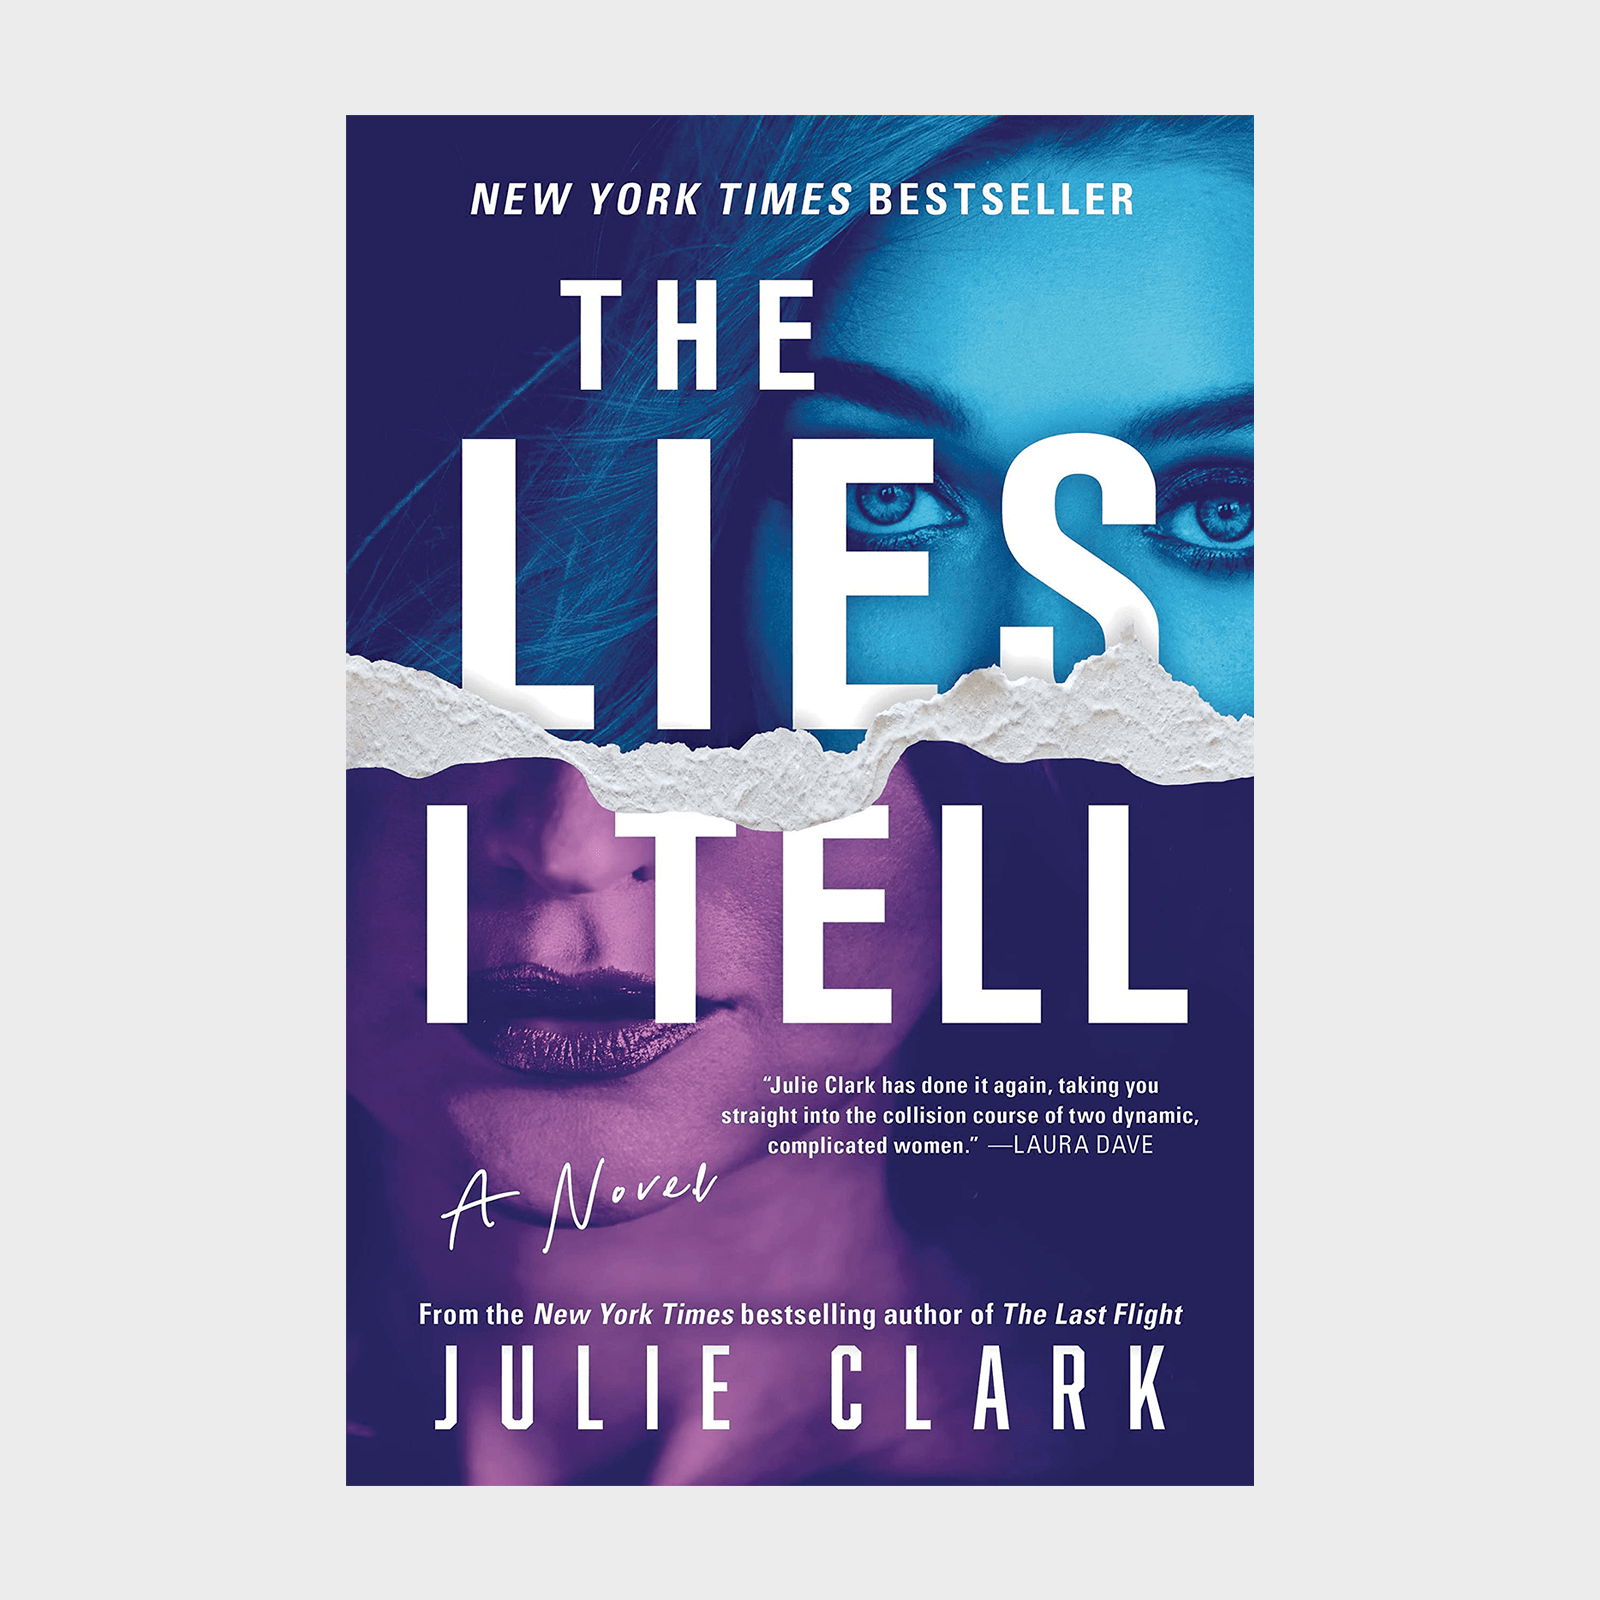 <p><strong>Release date:</strong> June 21, 2022</p> <p>Julie Clark's <a href="https://www.amazon.com/Lies-I-Tell-Novel/dp/1728247594" rel="noopener noreferrer">latest thriller</a> follows two women whose lives intertwine for the second time. First, there's Kat Roberts, the whip-smart journalist hell bent on unmasking the con woman who has eluded her for 10 years. Then there's the slippery pro herself: alternately known as Meg Williams, Maggie Littleton and Melody Wilde. When the two strike up a friendship—driven by their ulterior motives—who will come out on top? And how many lies will they tell before the truth comes out?</p> <p class="listicle-page__cta-button-shop"><a class="shop-btn" href="https://www.amazon.com/Lies-I-Tell-Novel/dp/1728247594">Shop Now</a></p>